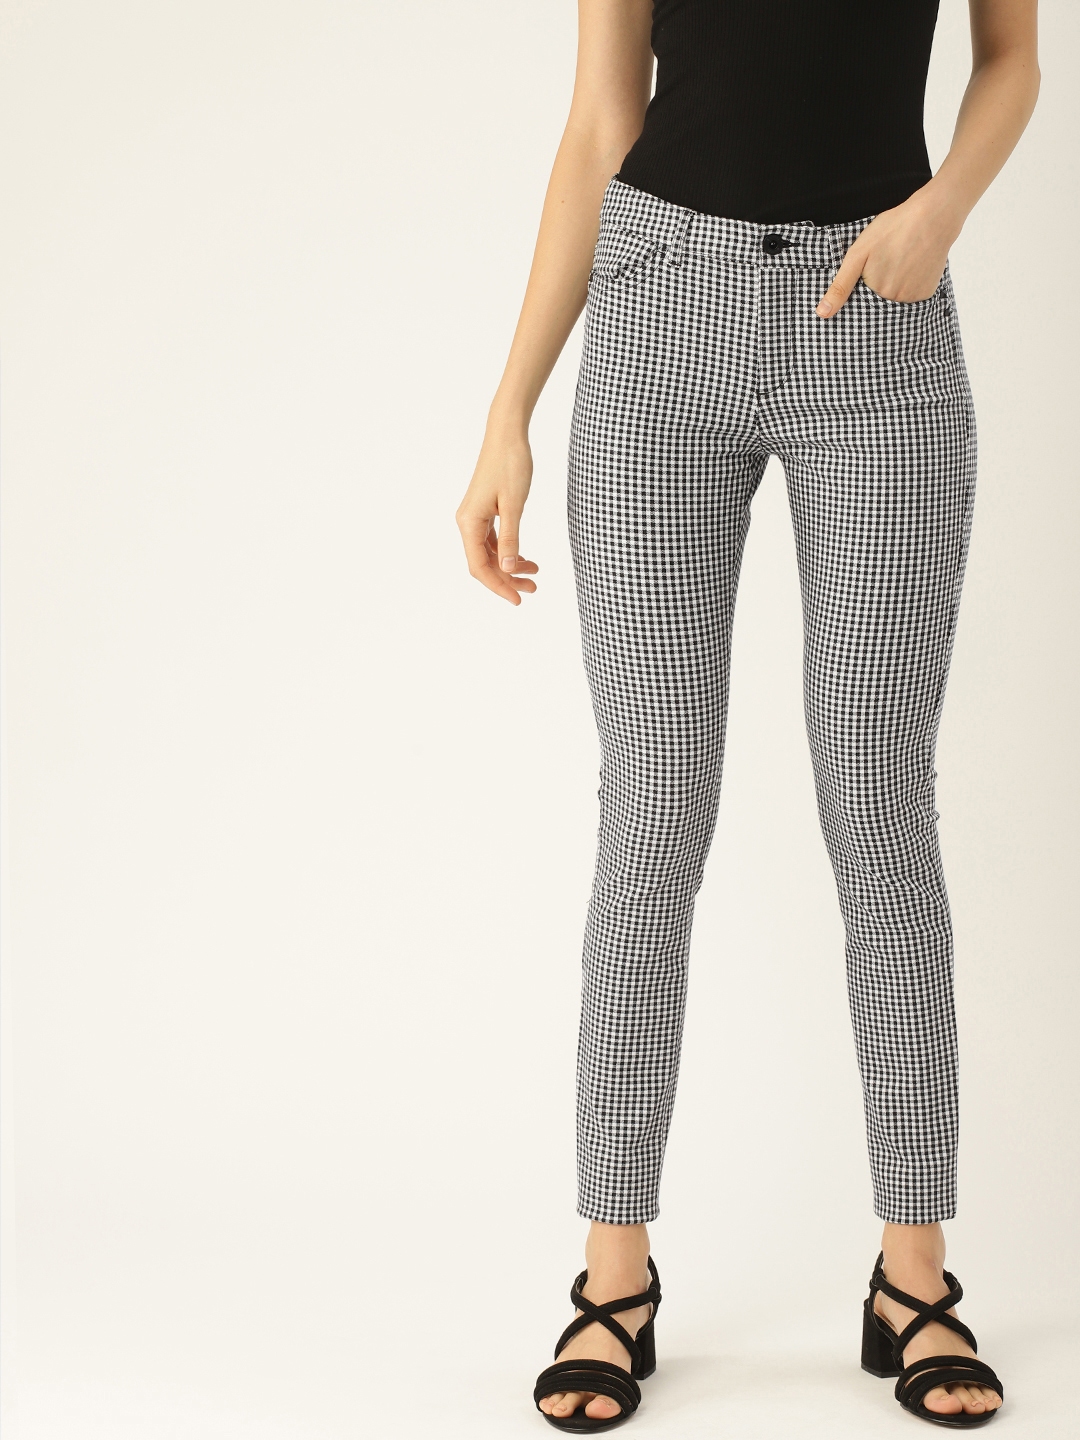 Navy Check Skinny Trousers  Trousers  PrettyLittleThing